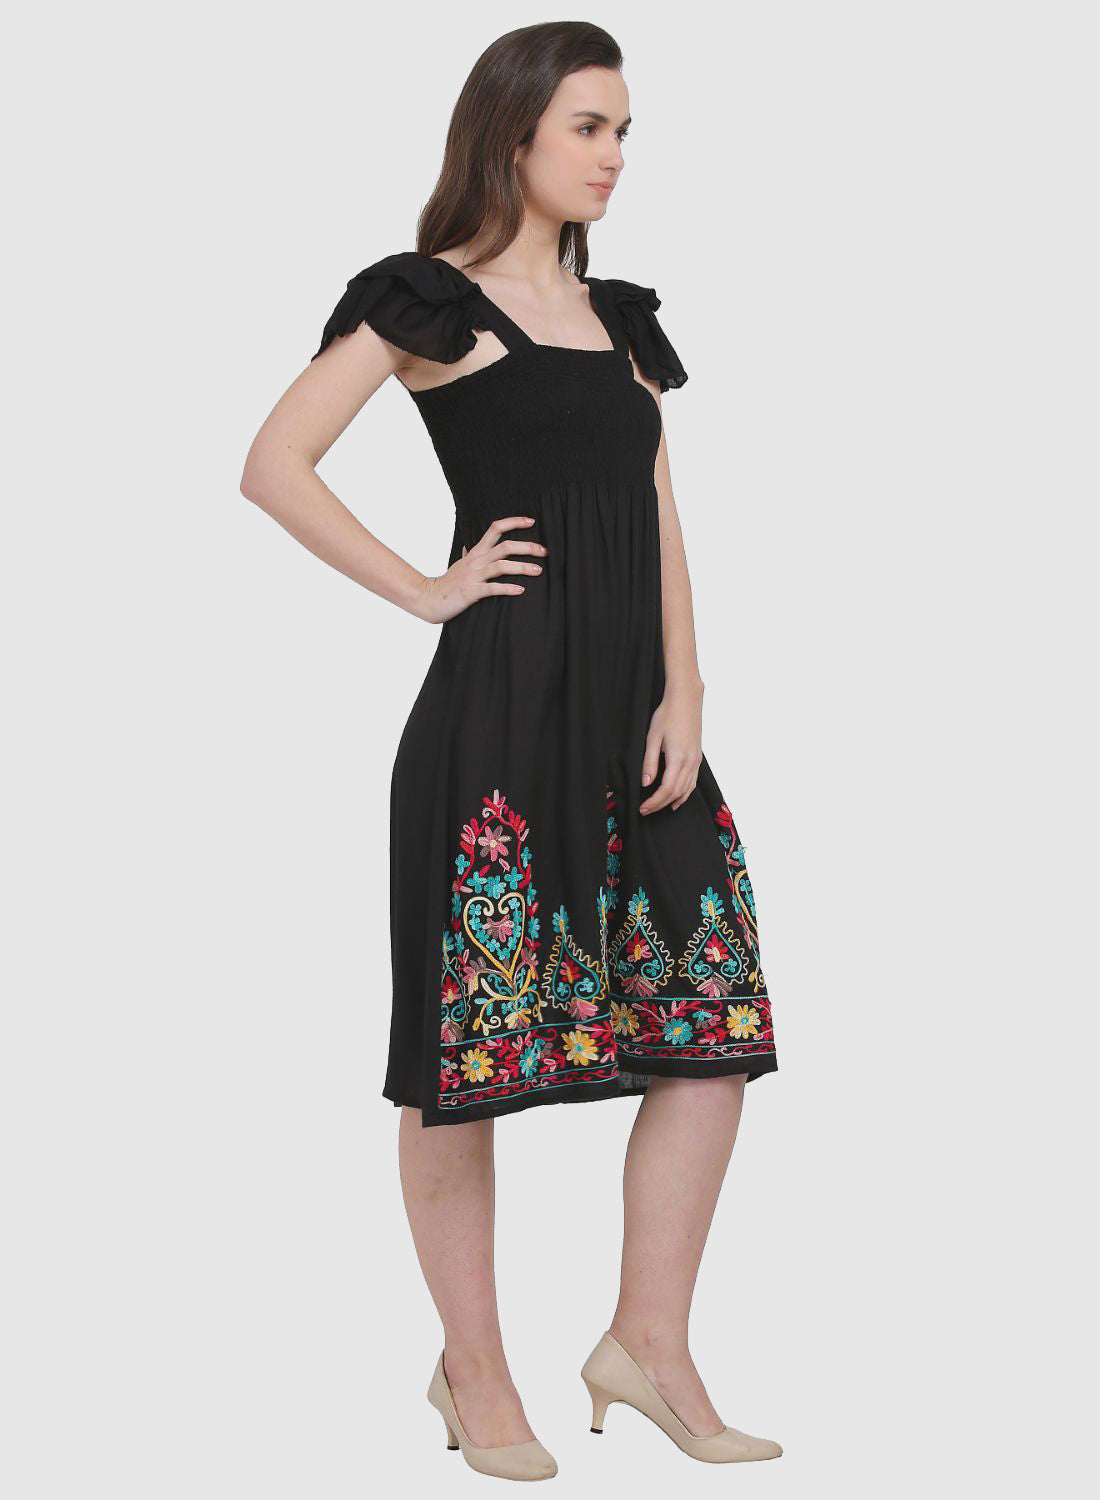 Women Dress Black Fit and Flare Rayon Midi Embroidery Work Caps Sleeves